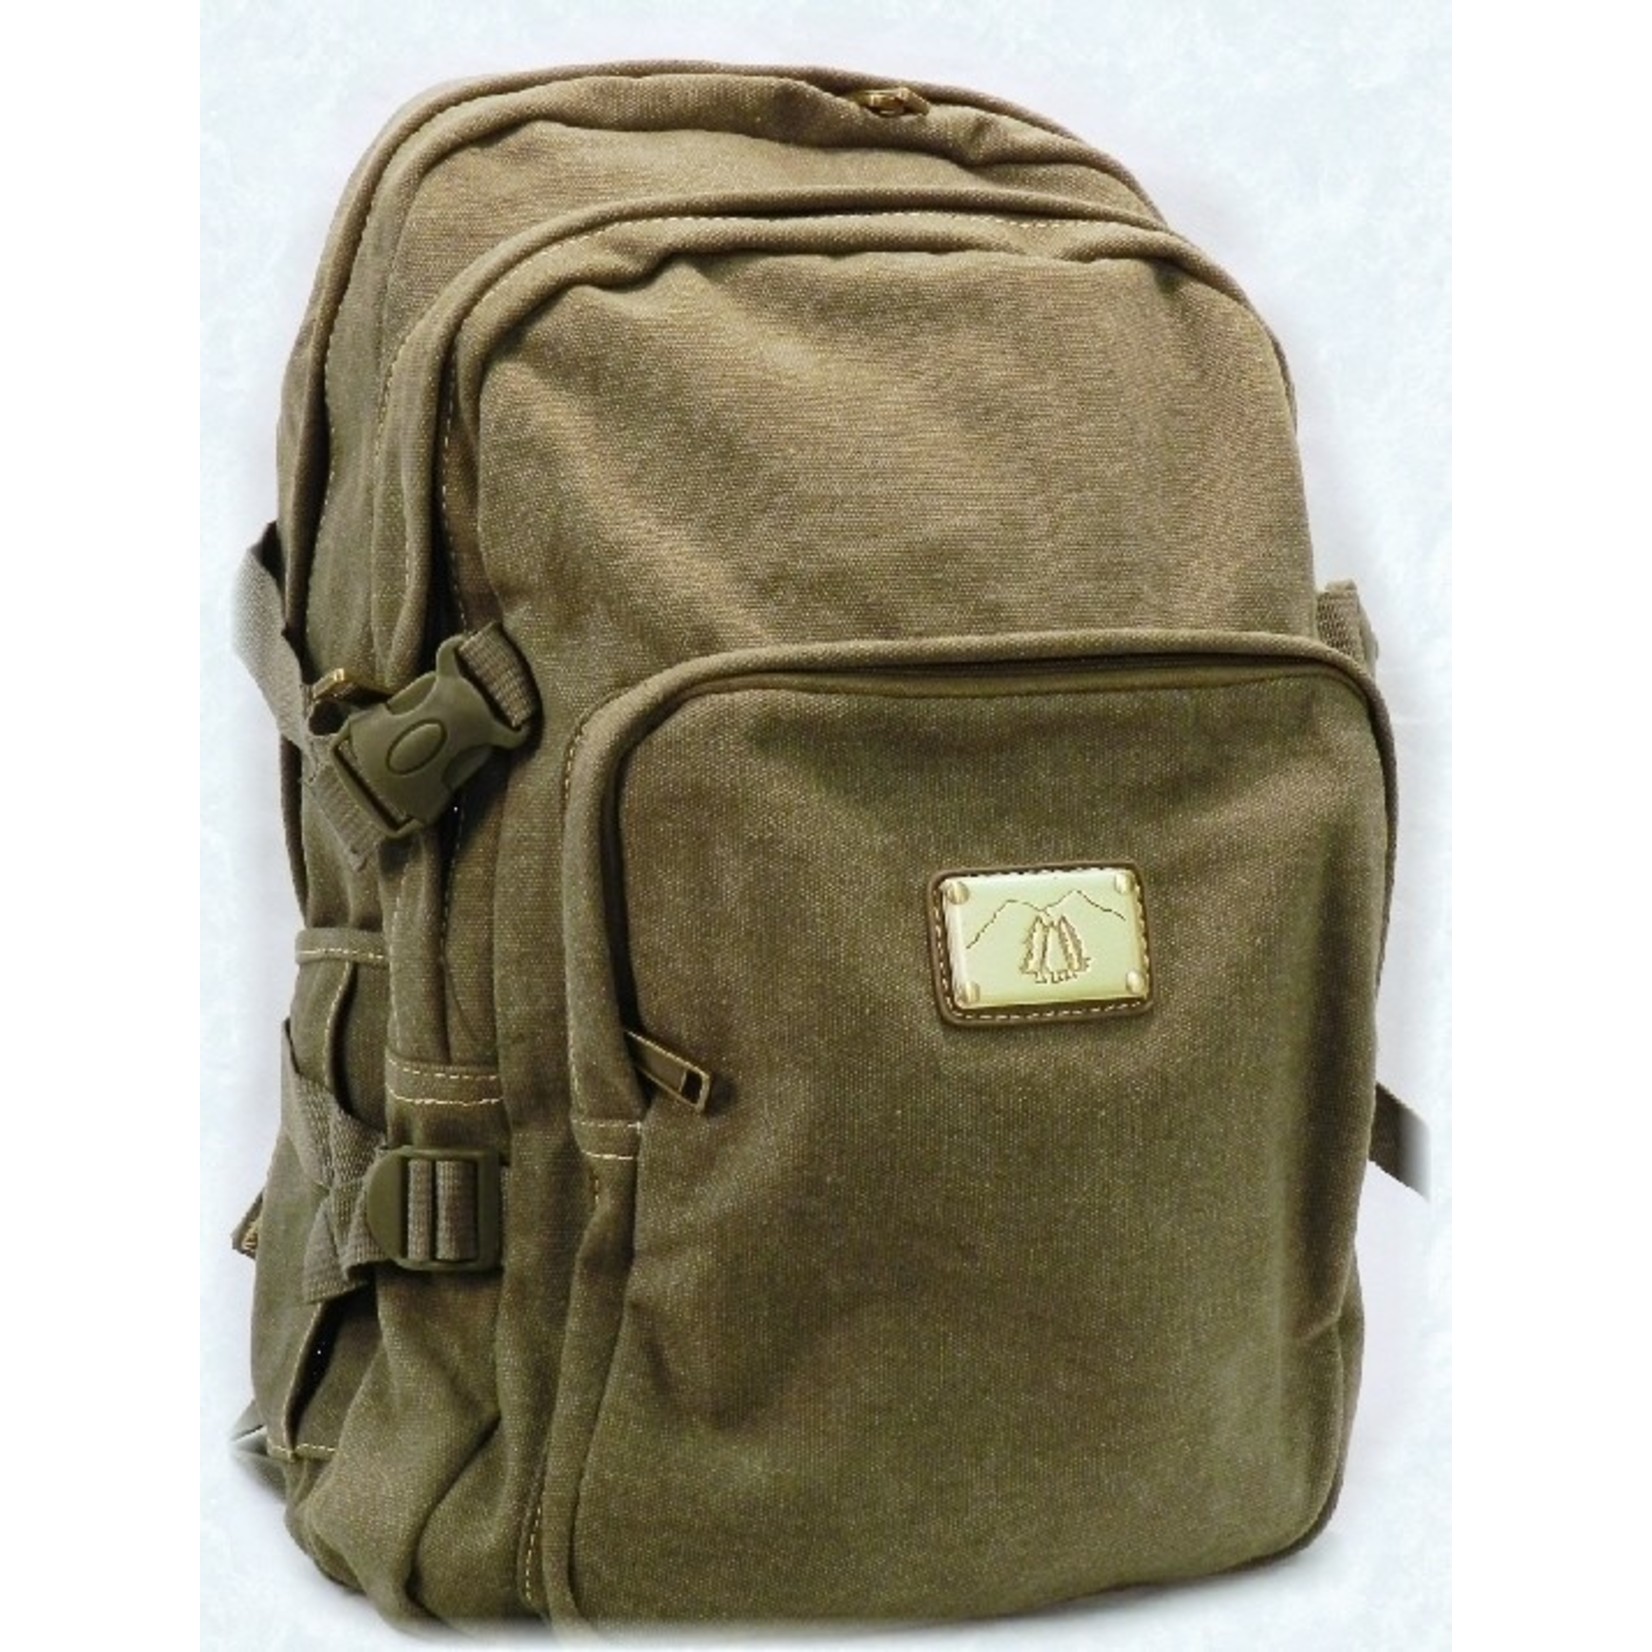 Triple Tree Canvas 3902 Canvas Backpack 18"